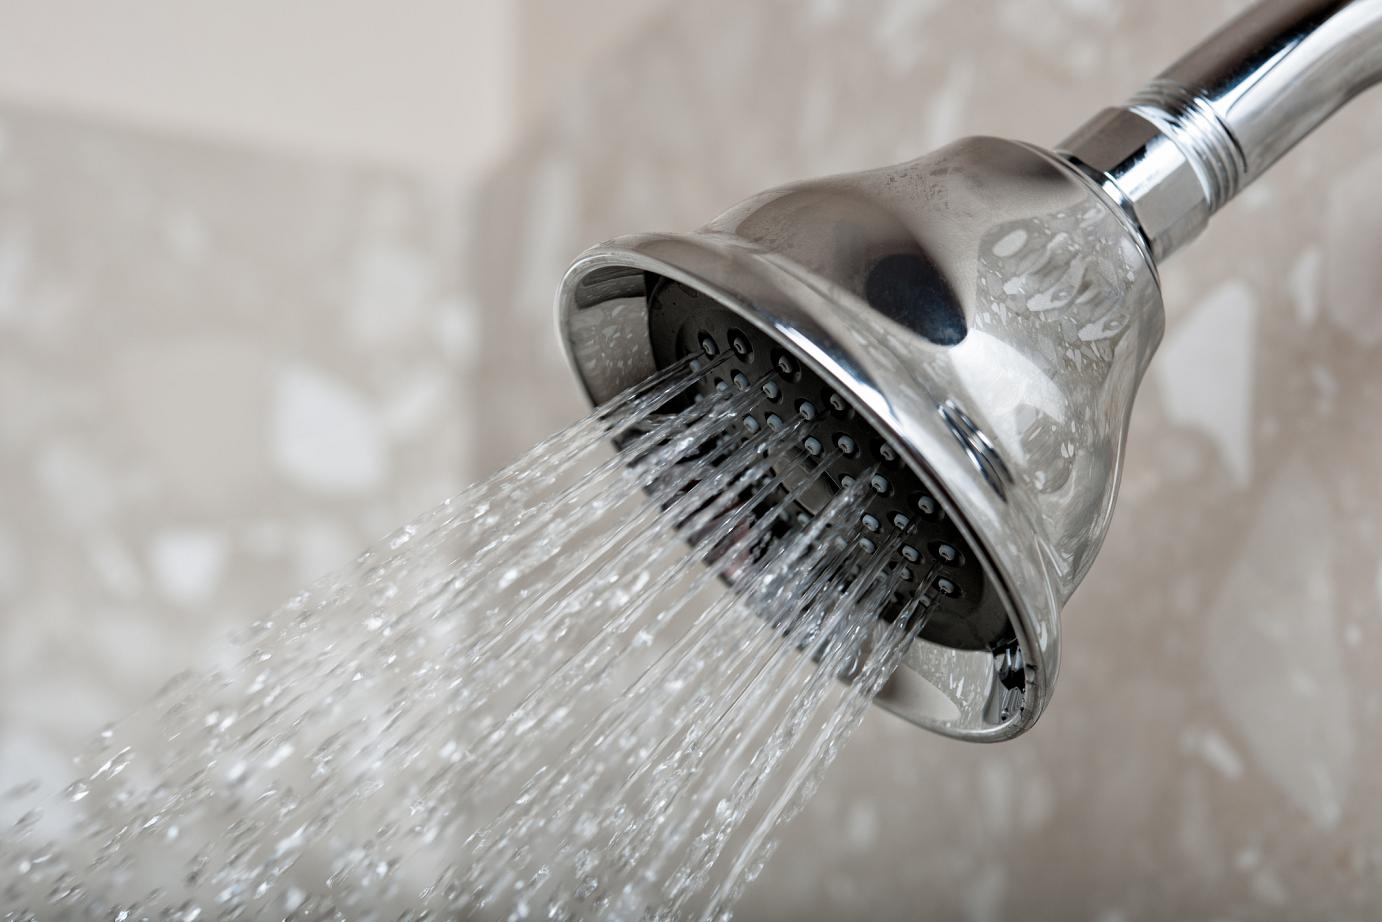 Shower head with water flowing